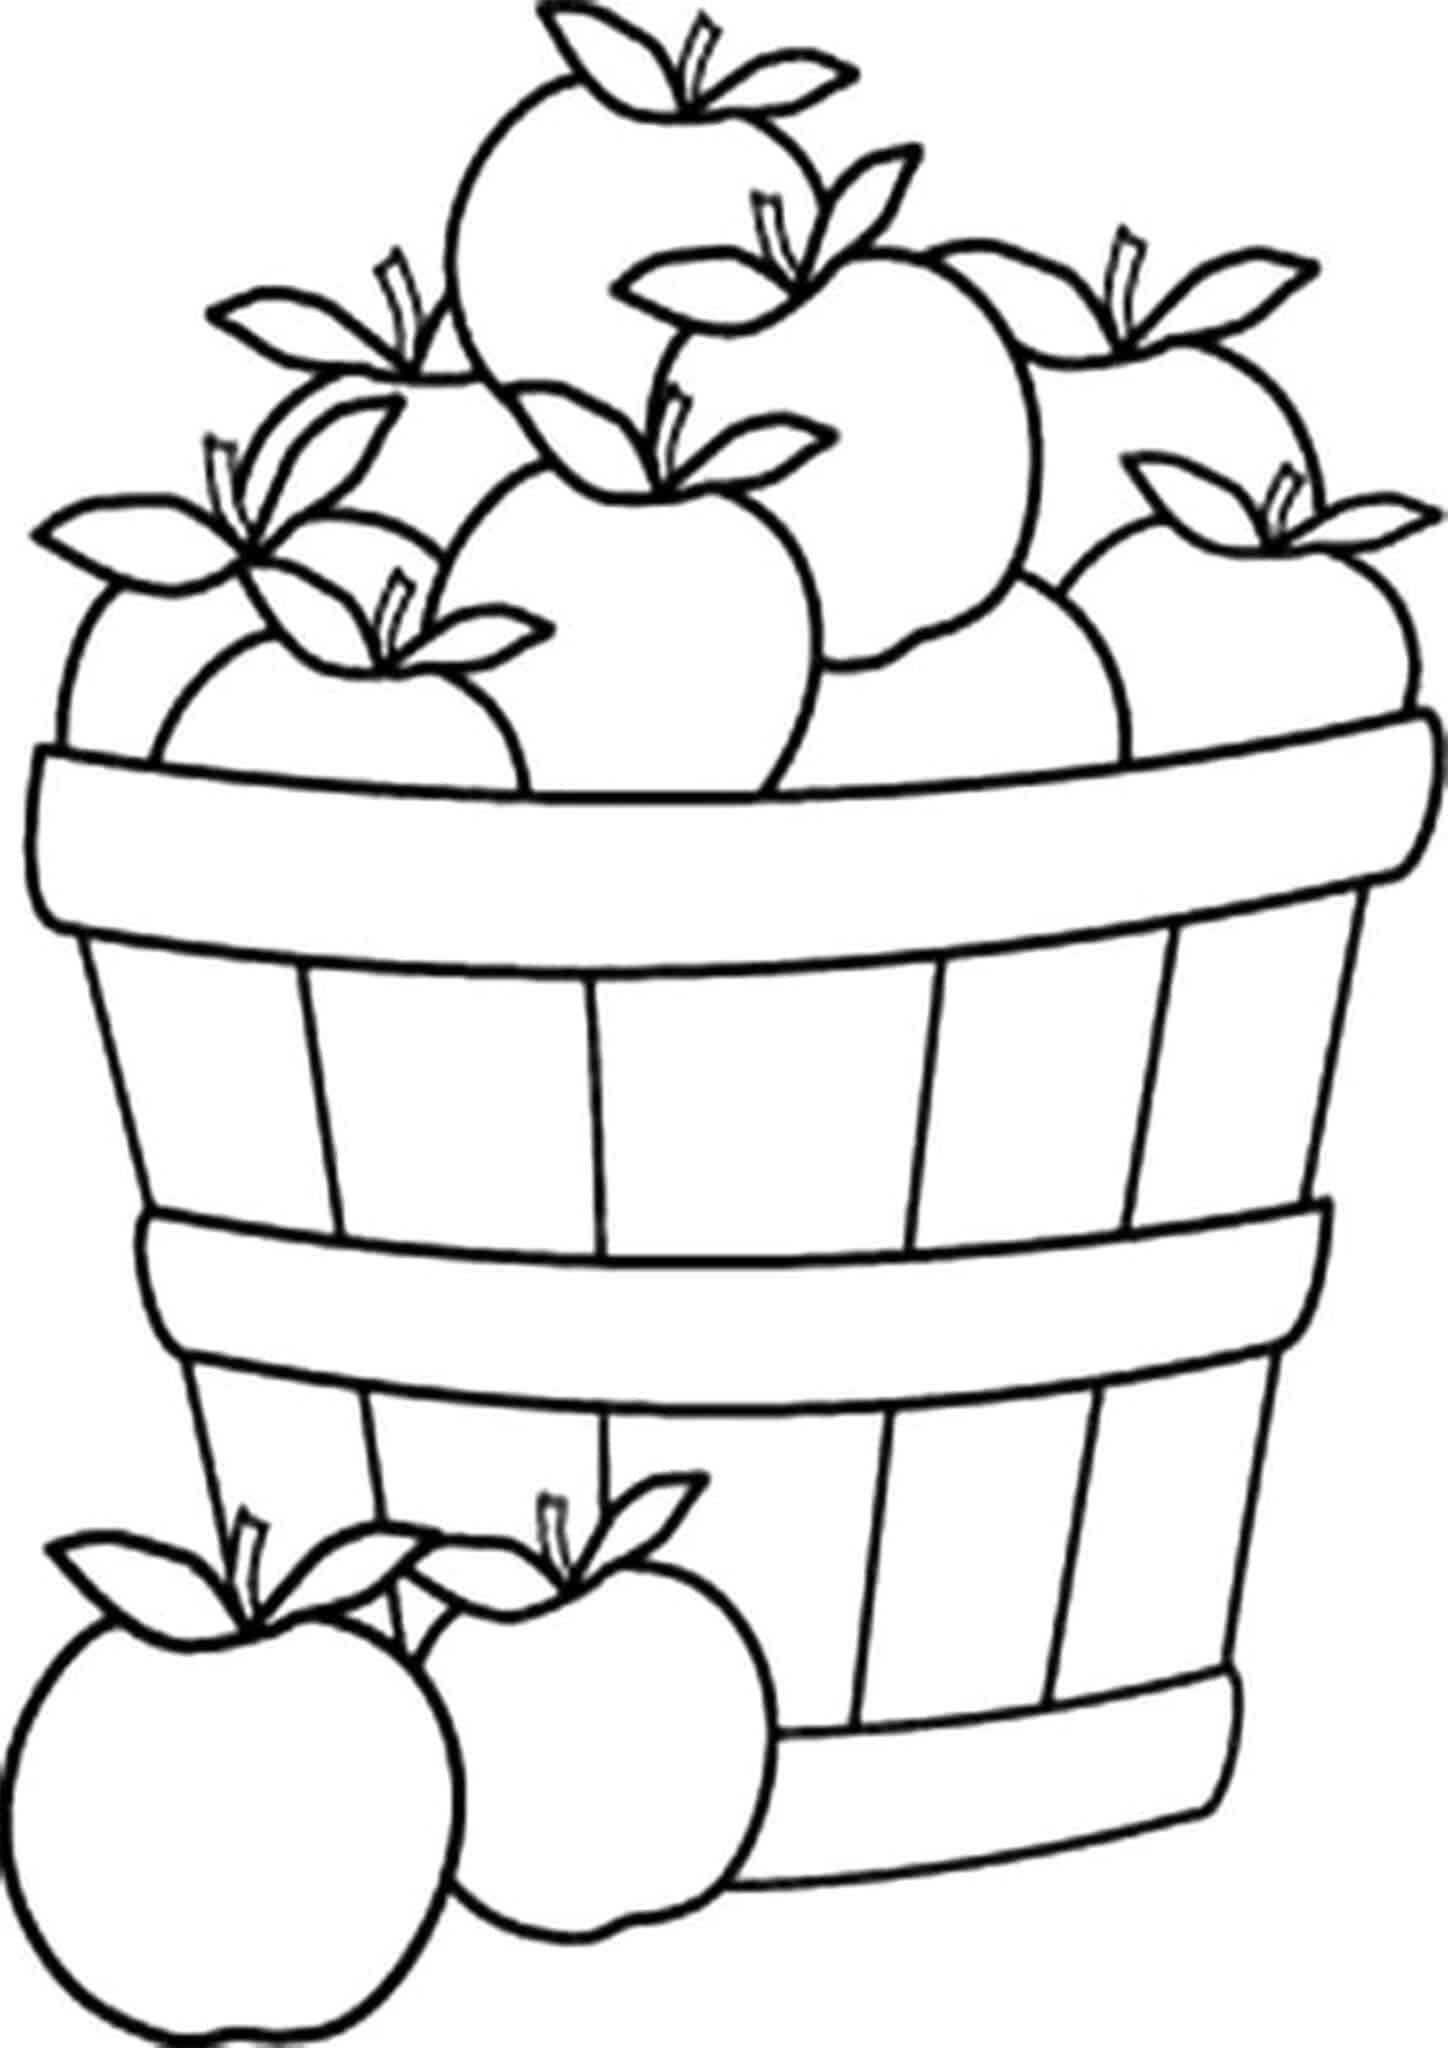 for apple download Coloring Games: Coloring Book & Painting